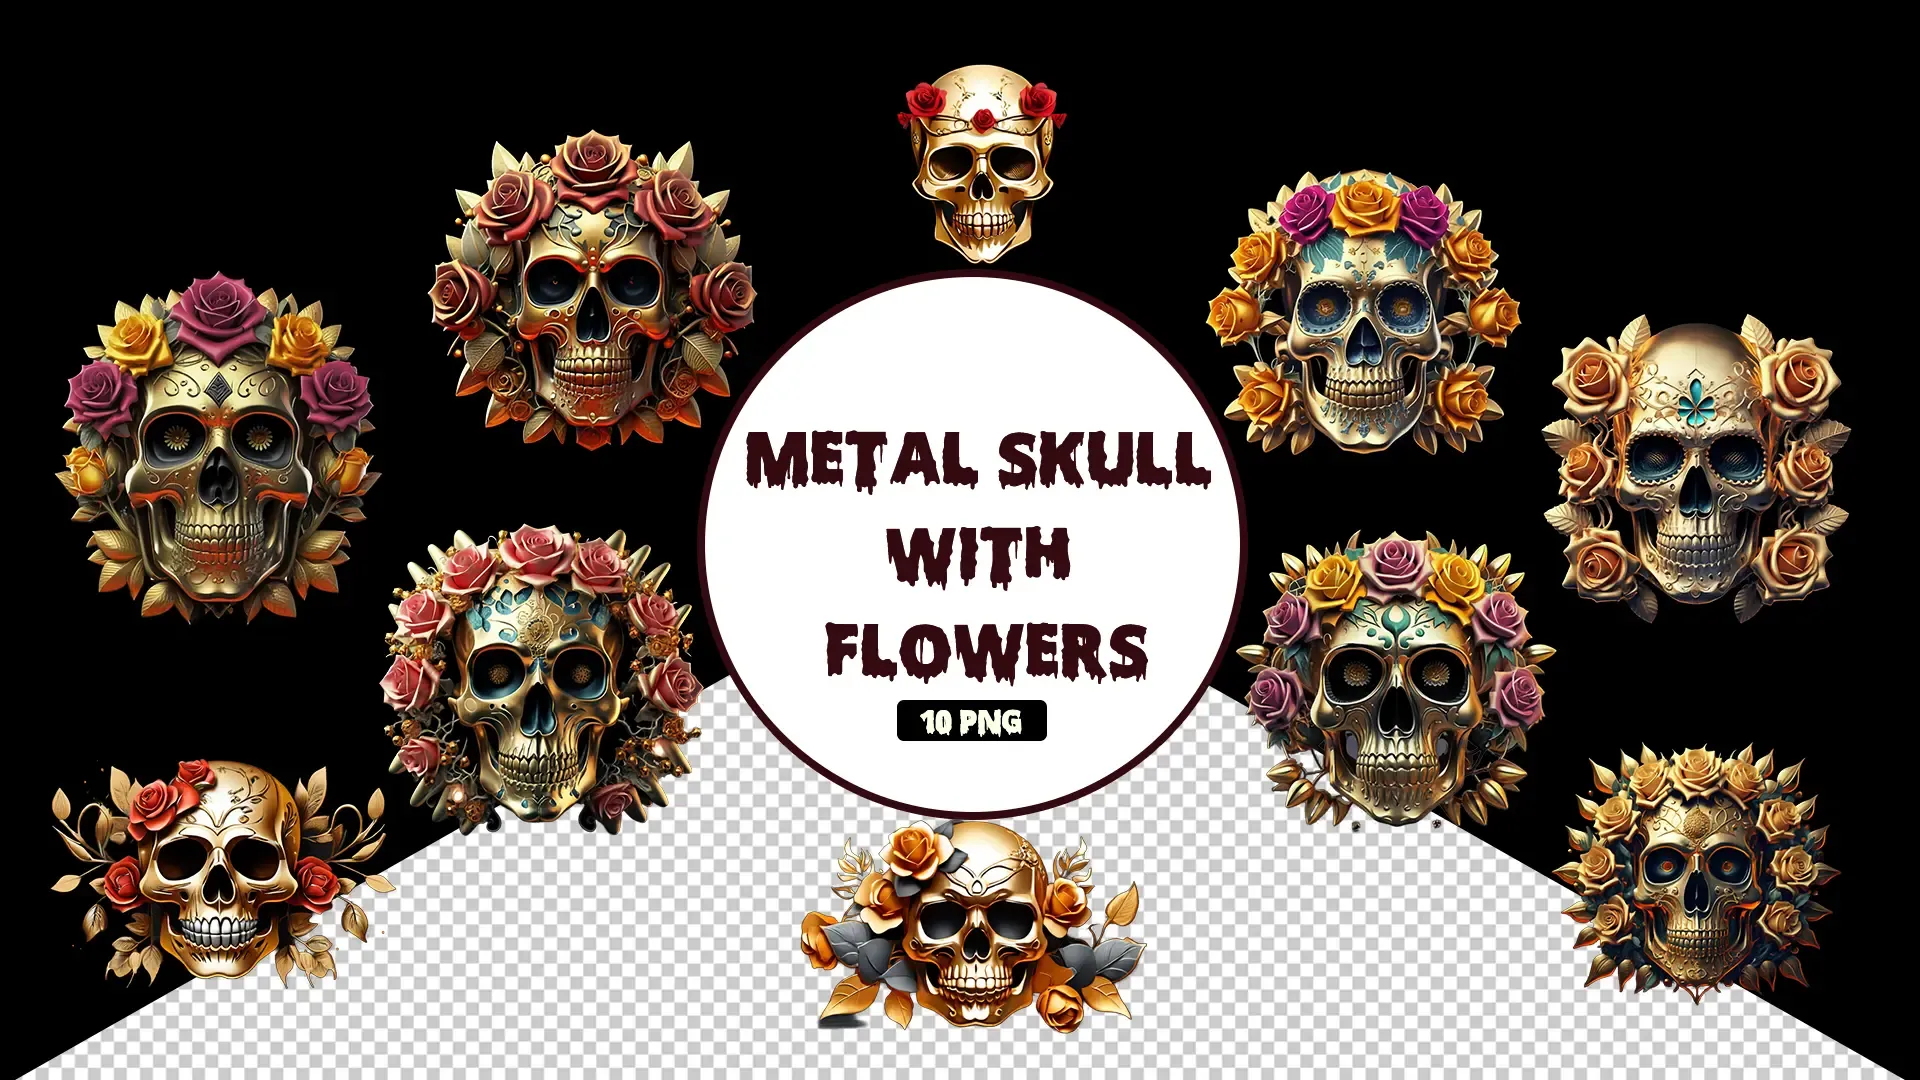 Dark Aesthetic Skull and Flower Collection image